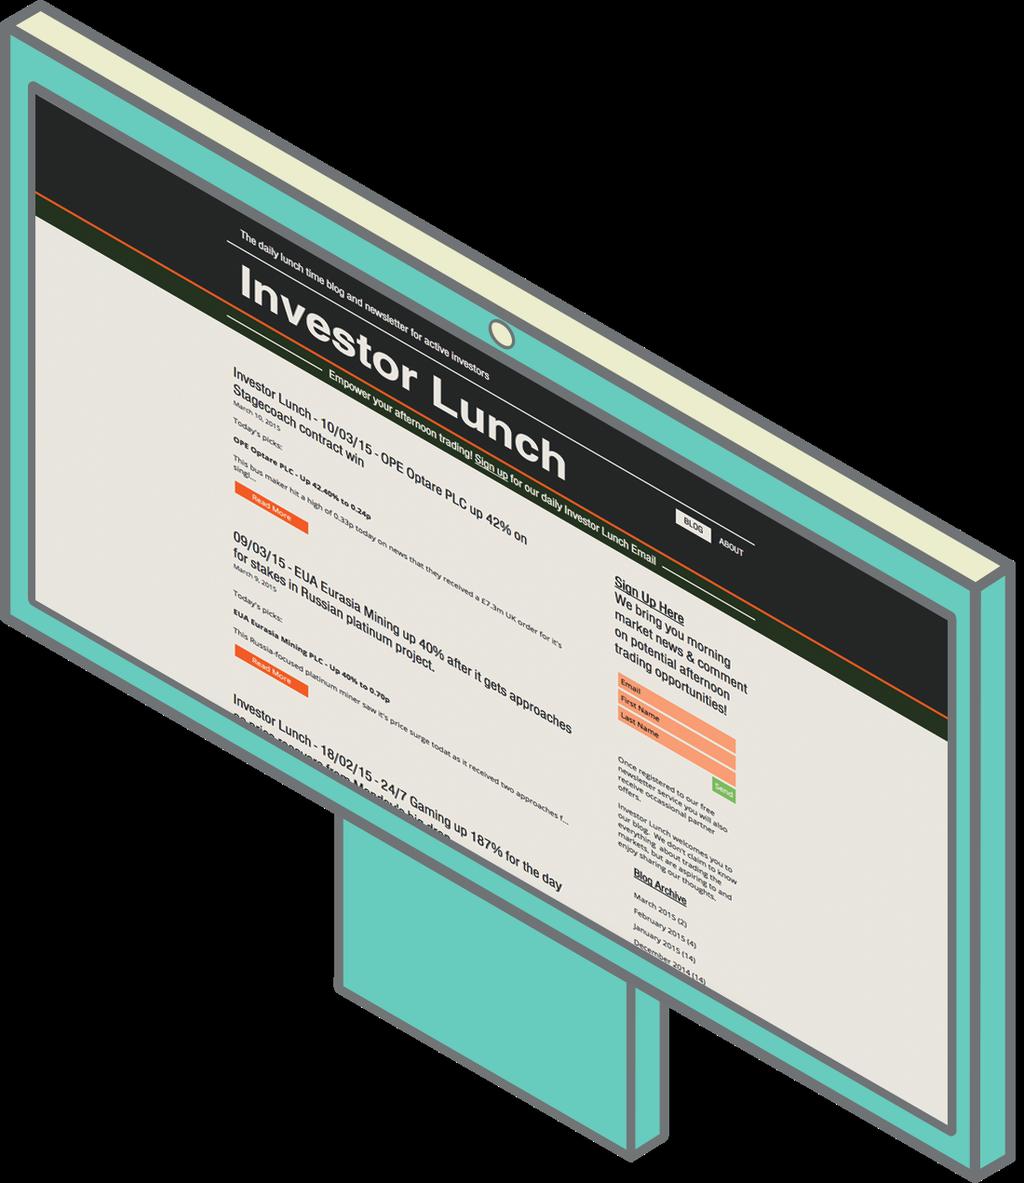 8 Financial Portfolio - In House Investor Lunch DATABASE SIZE: 49,000 Investor Lunch is a daily lunchtime blog and newsletter for active traders and investors.